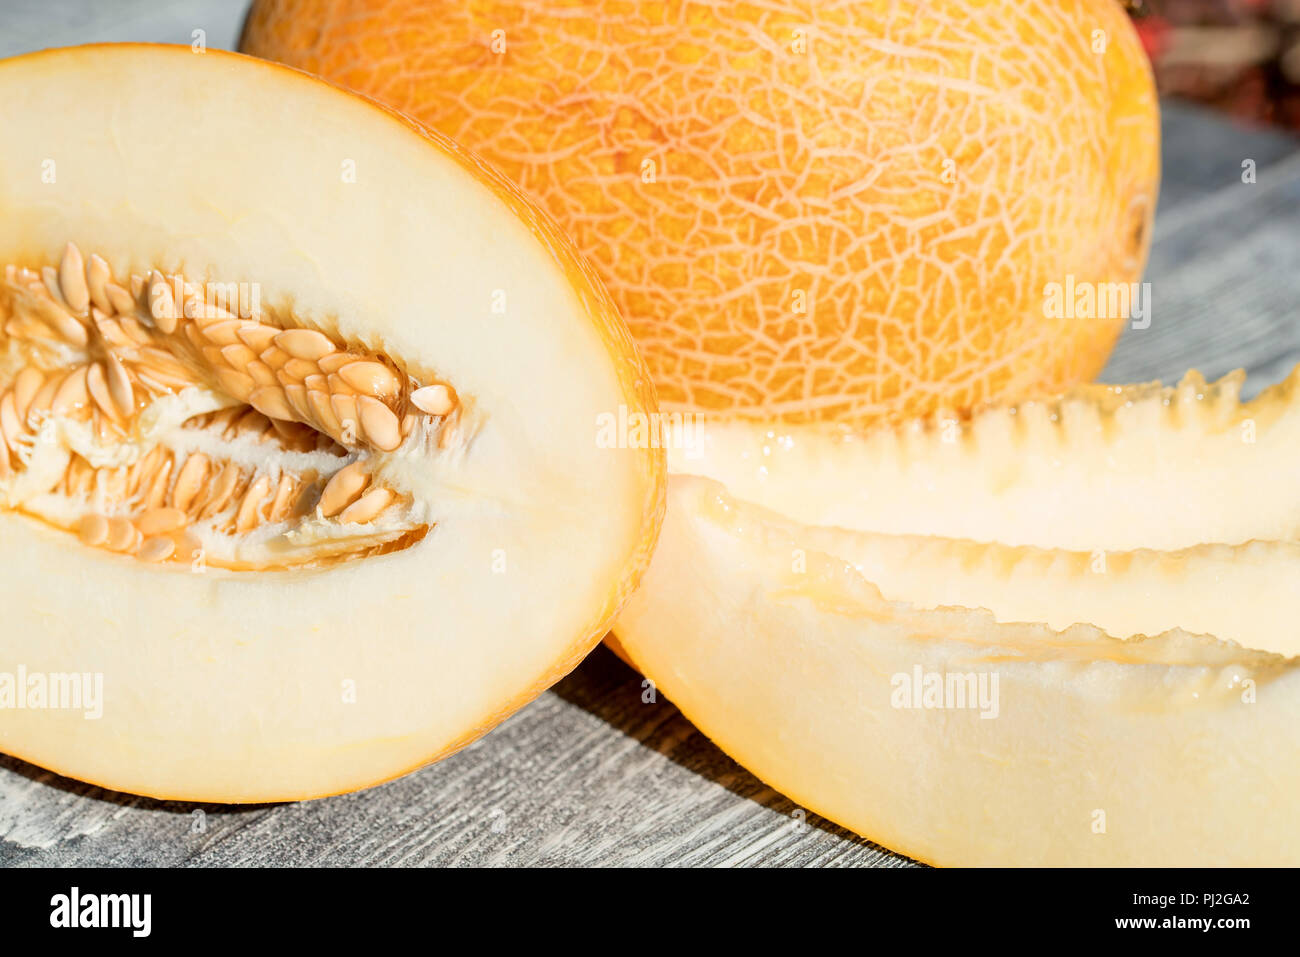 Whole and sliced melon on wooden table outdoors Stock Photo